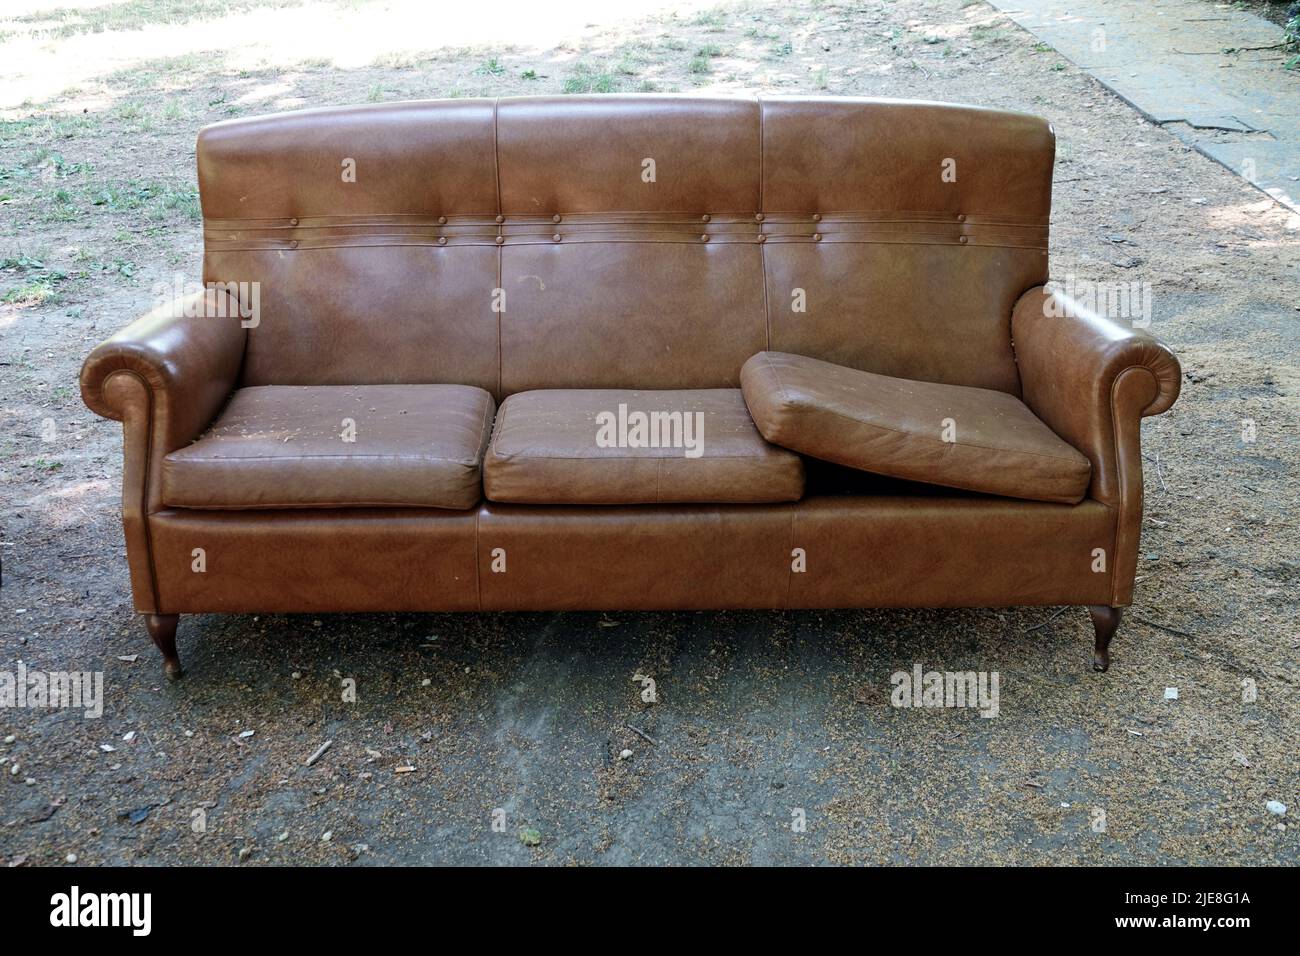 Old vintage brown leather sofa abandoned in a park Stock Photo